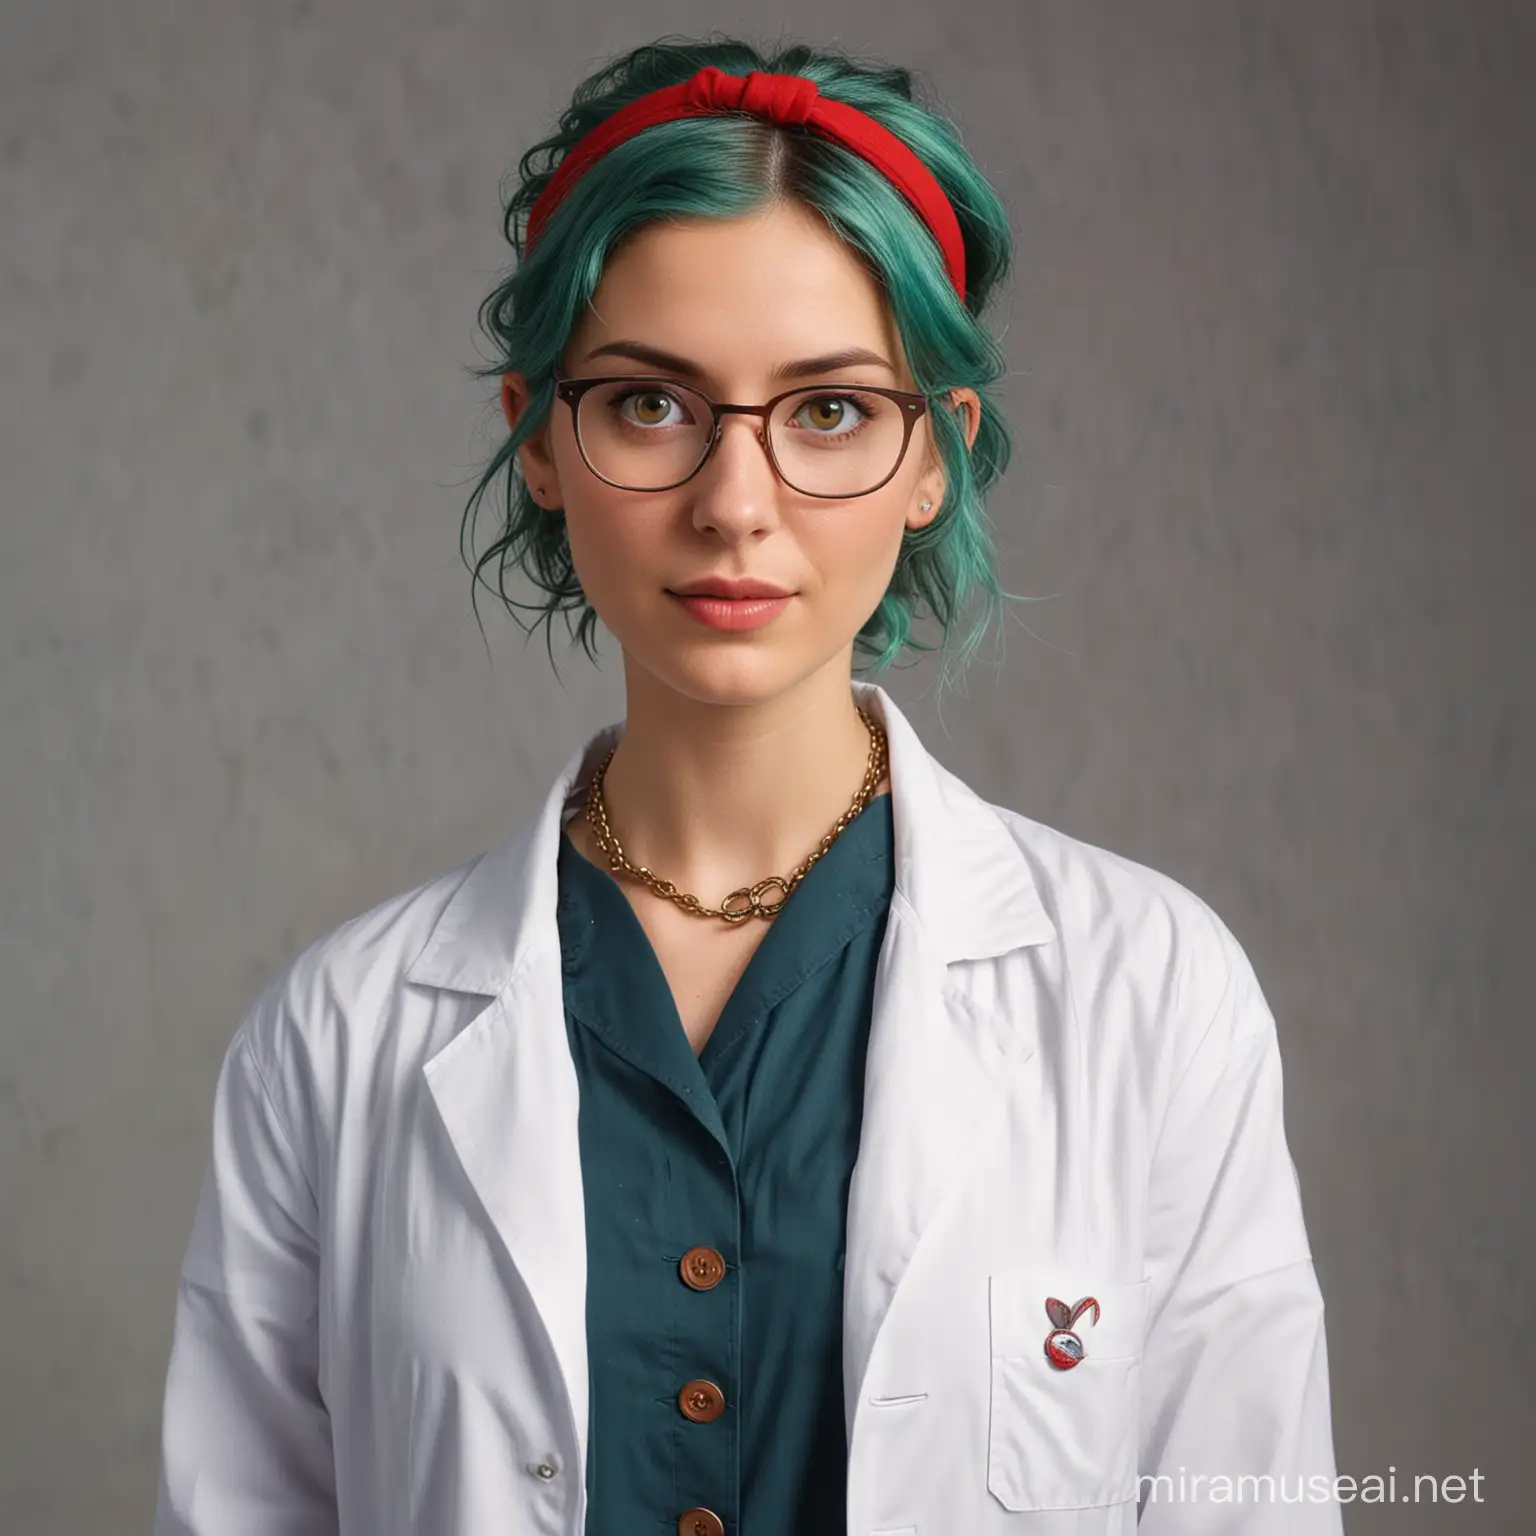 slender woman with medium-length, wavy, green hair that is pulled back by a red headband. She has green eyes and two moles under her right eye.

wears a blue shirt, a khaki skirt, a pair of brown shoes, and a white lab coat. She also wears eyeglasses with a chain connecting them so they can hang around her neck.